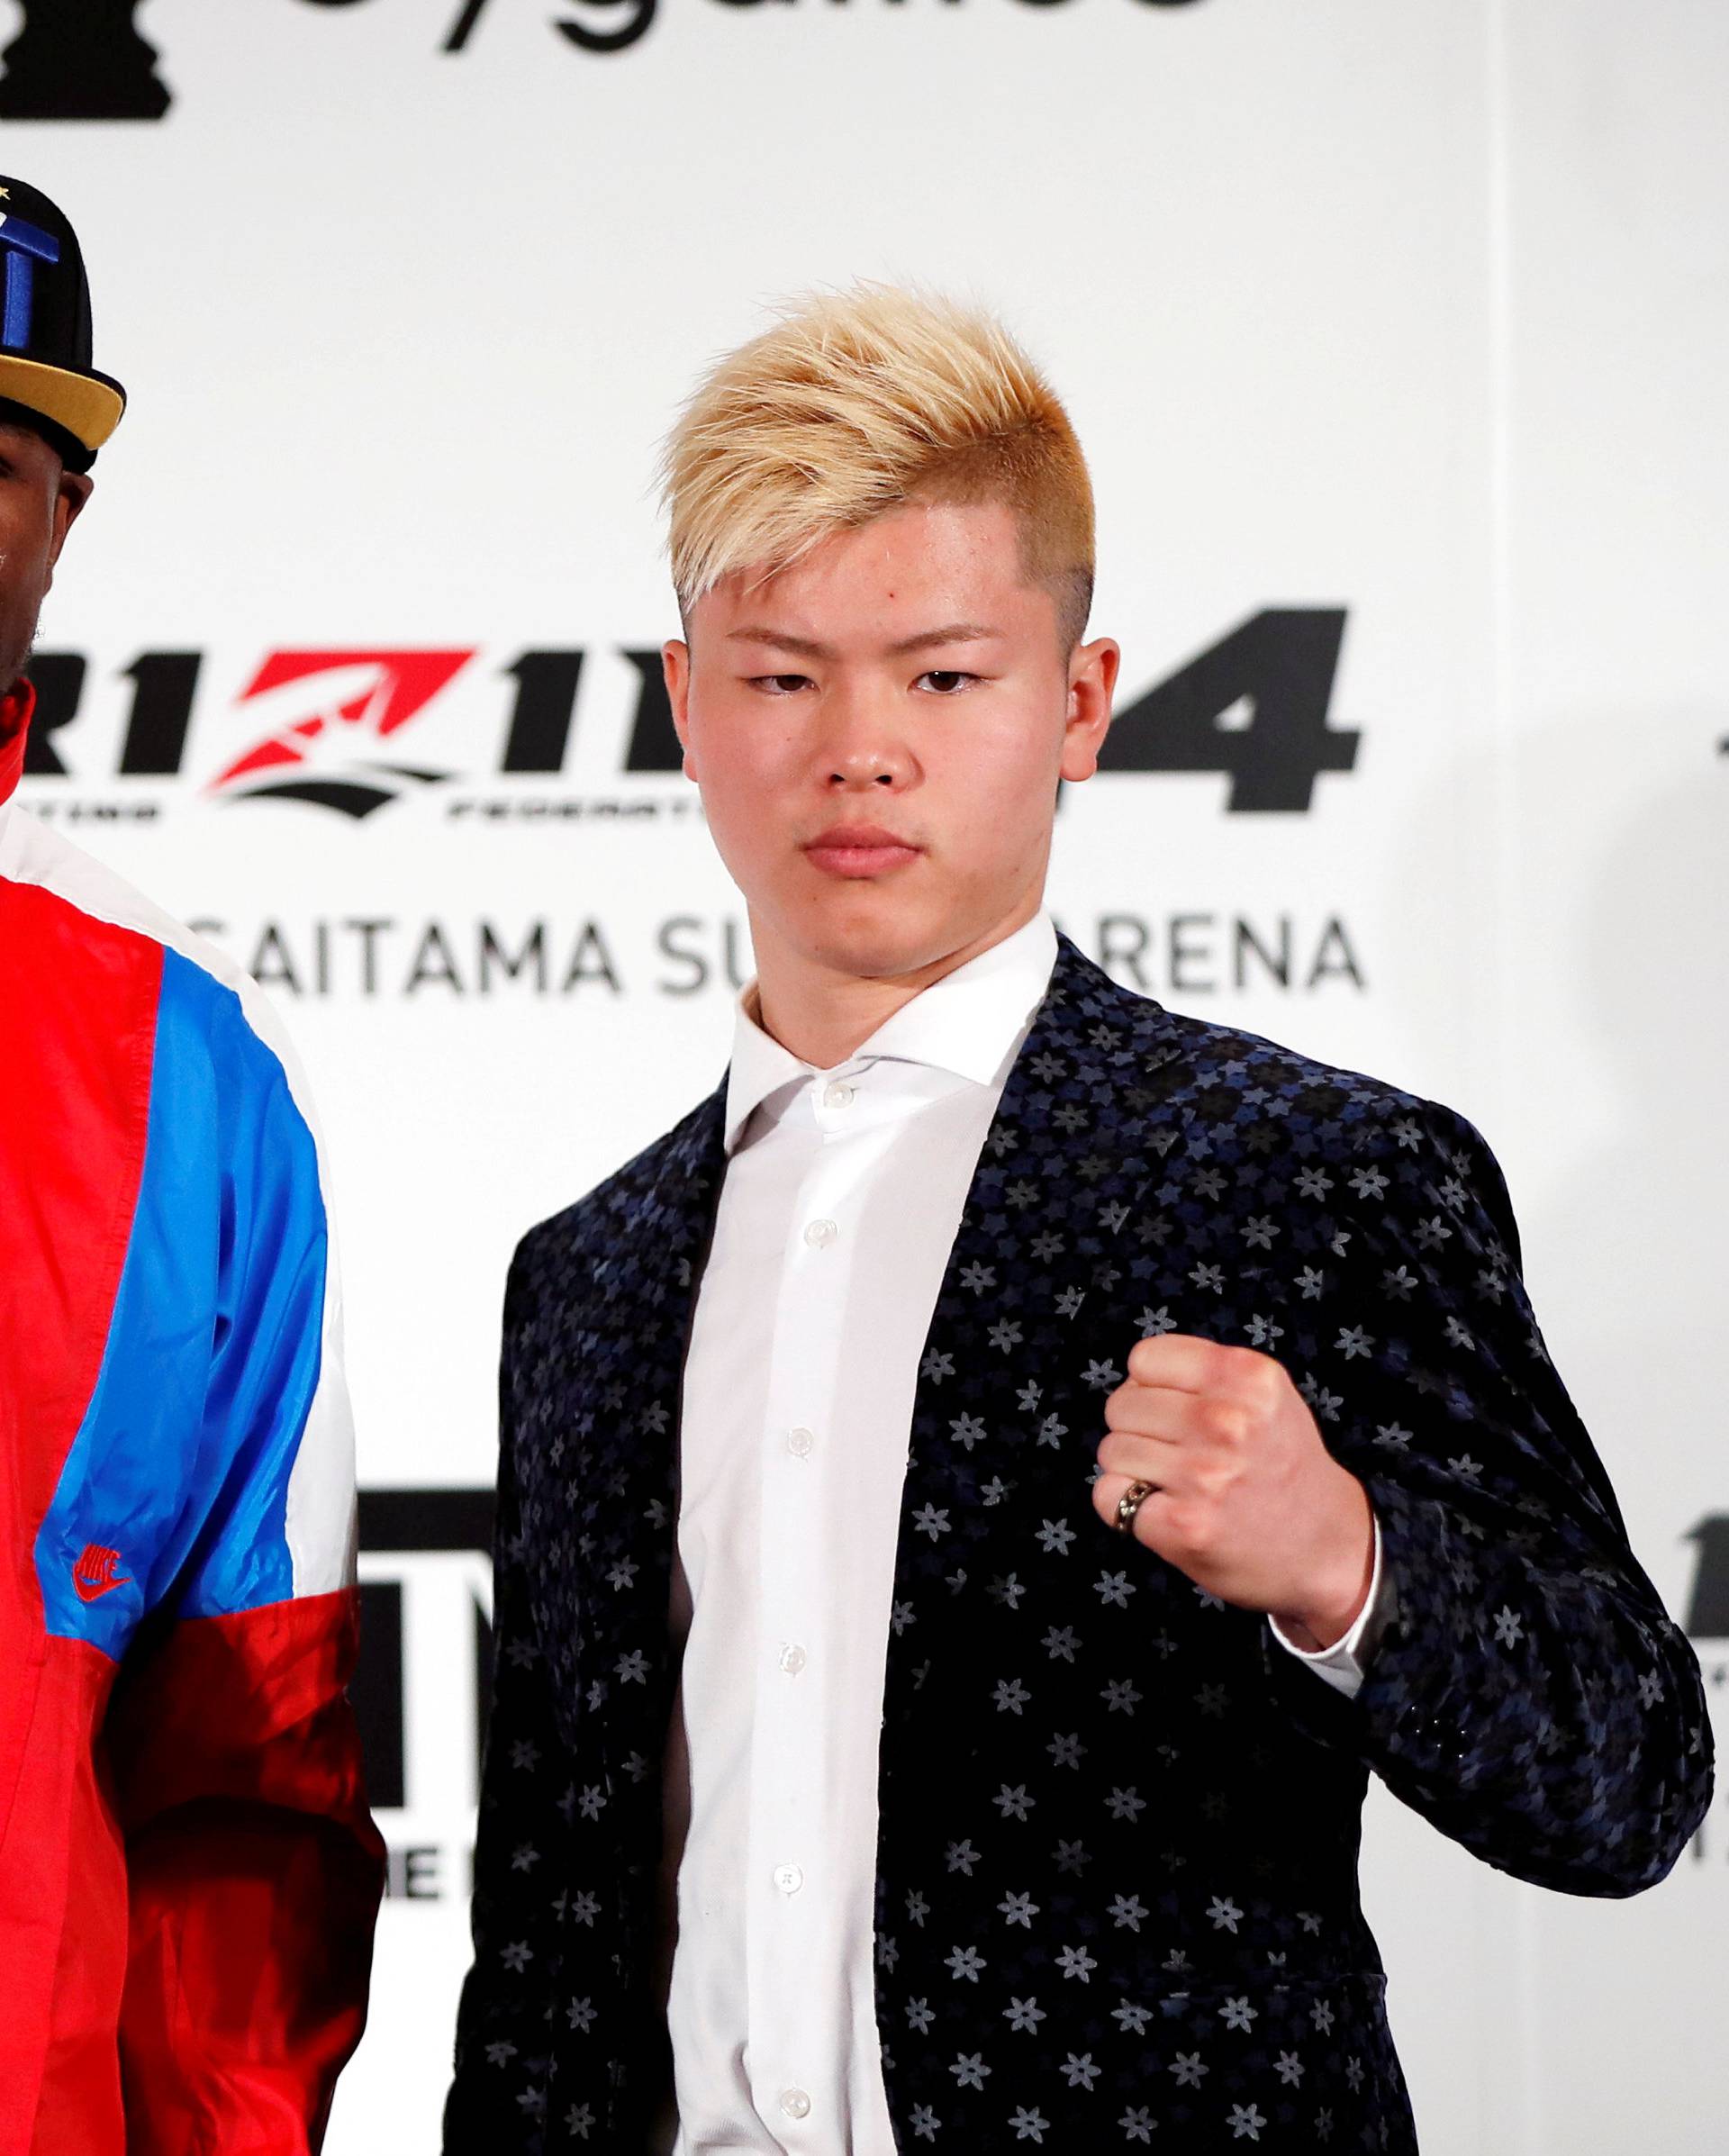 Boxer Floyd Mayweather Jr. of the U.S. poses for a photograph with his opponent Tenshin Nasukawa during a news conference in Tokyo